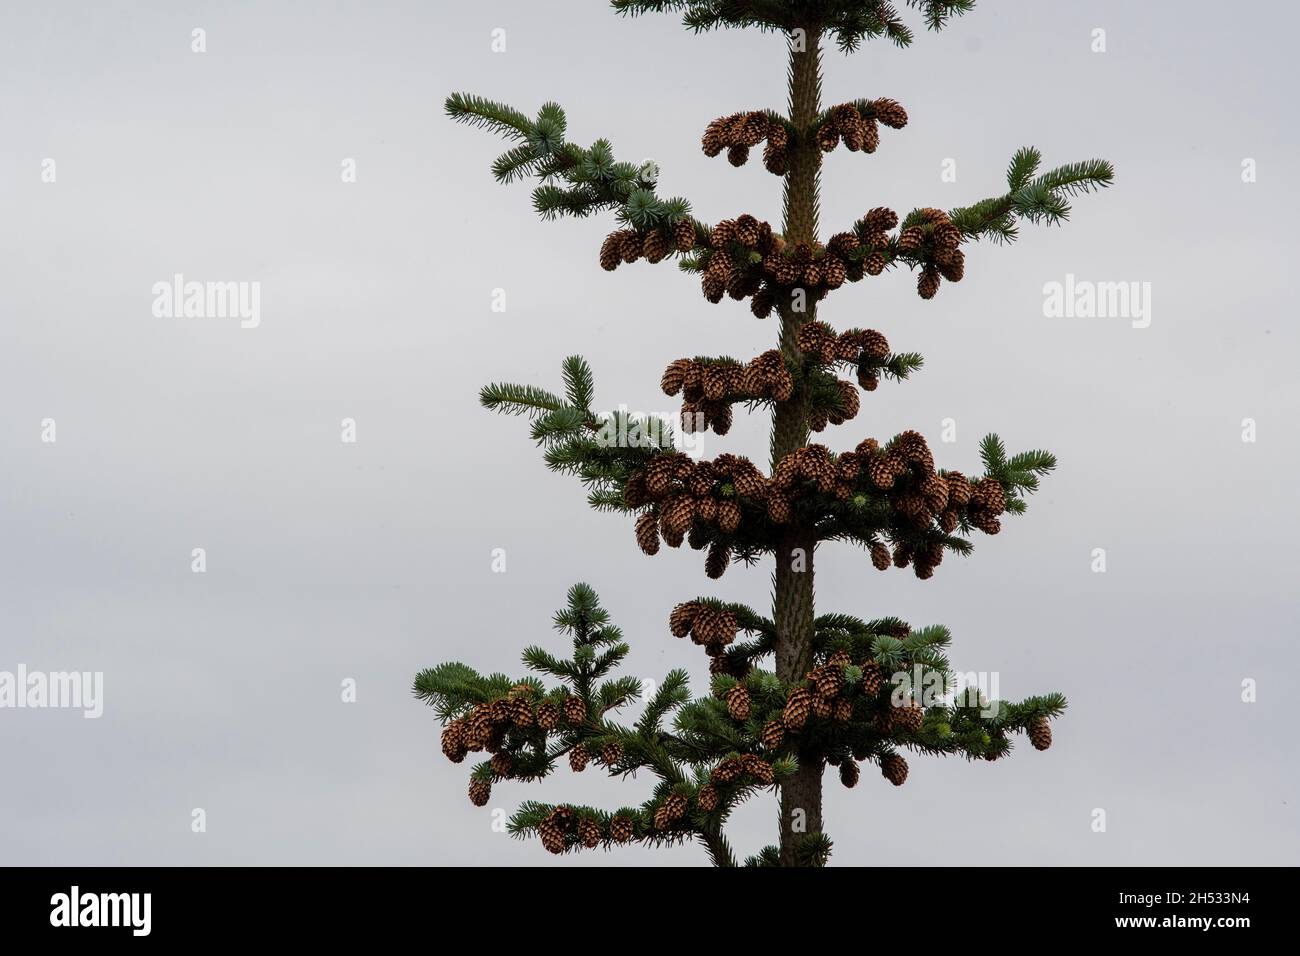 Landscape of Picea engelmannii spruce tree Selfoss South Iceland Stock Photo